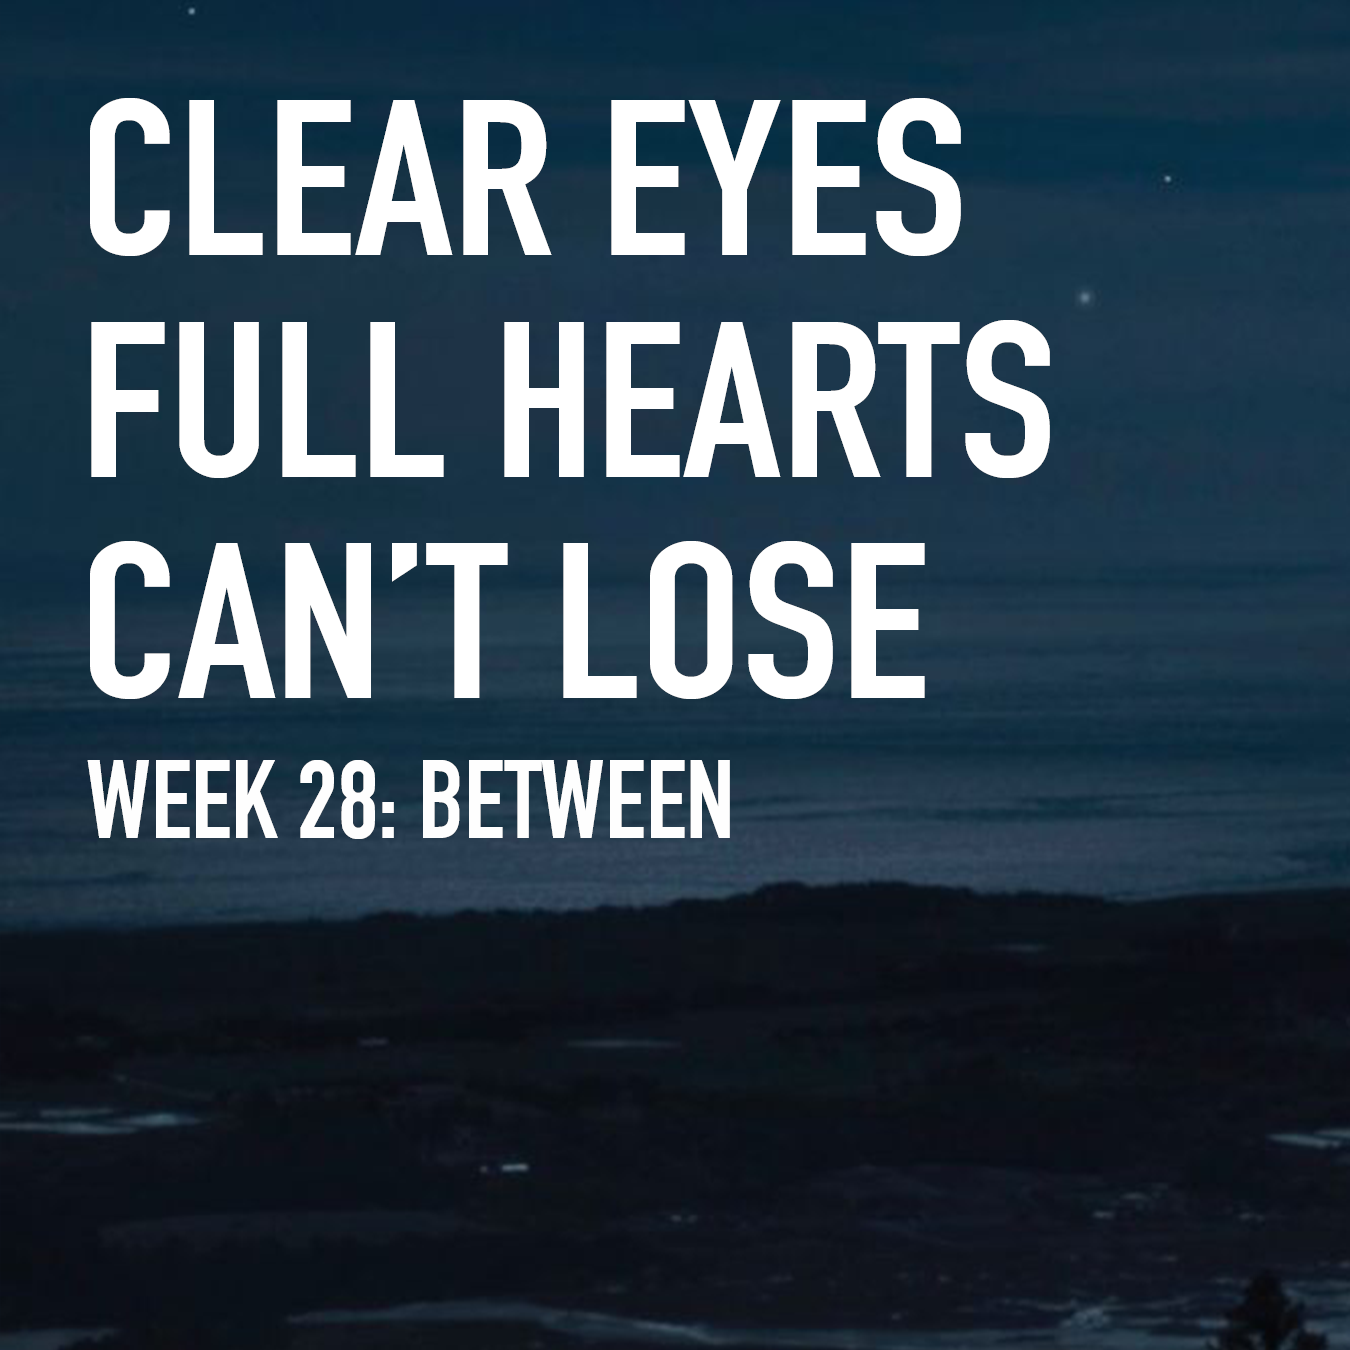 Clear Eyes, Full Hearts, Can't Lose. Week 28: Between